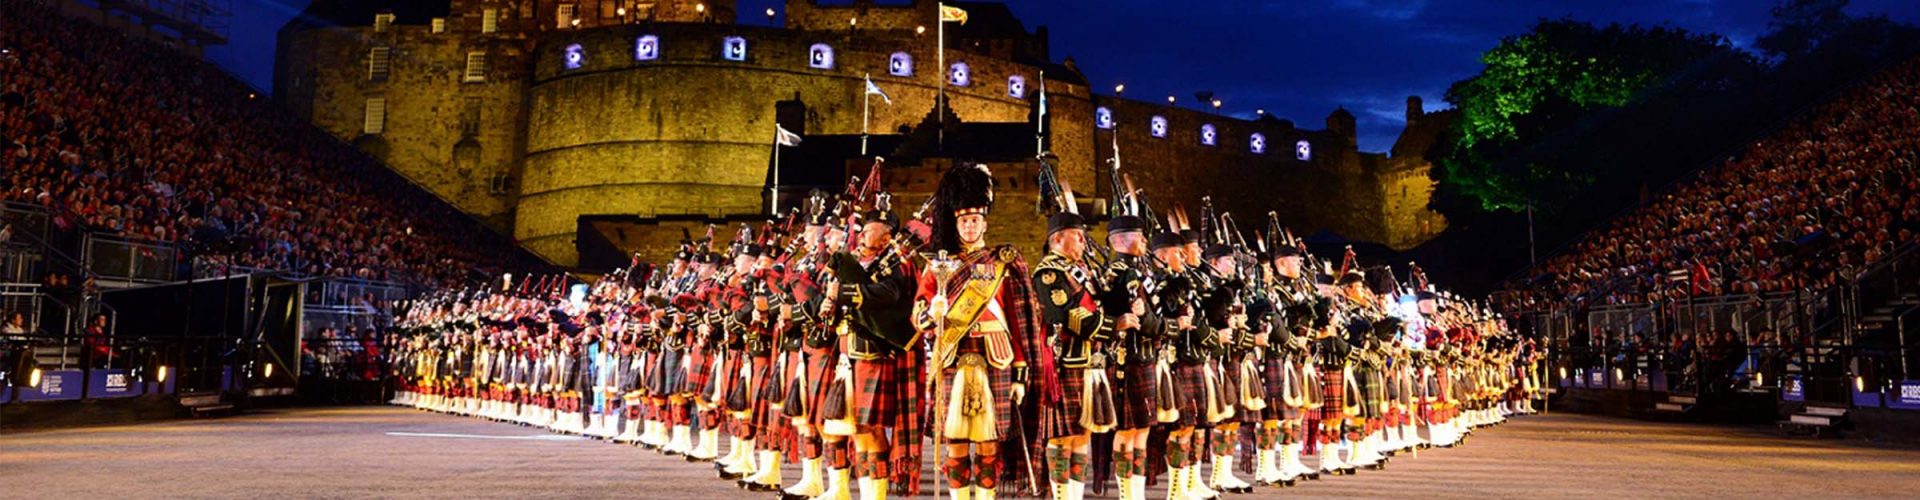 The Pipes and Drums forming a diamond at The Royal Edinburgh Military Tattoo